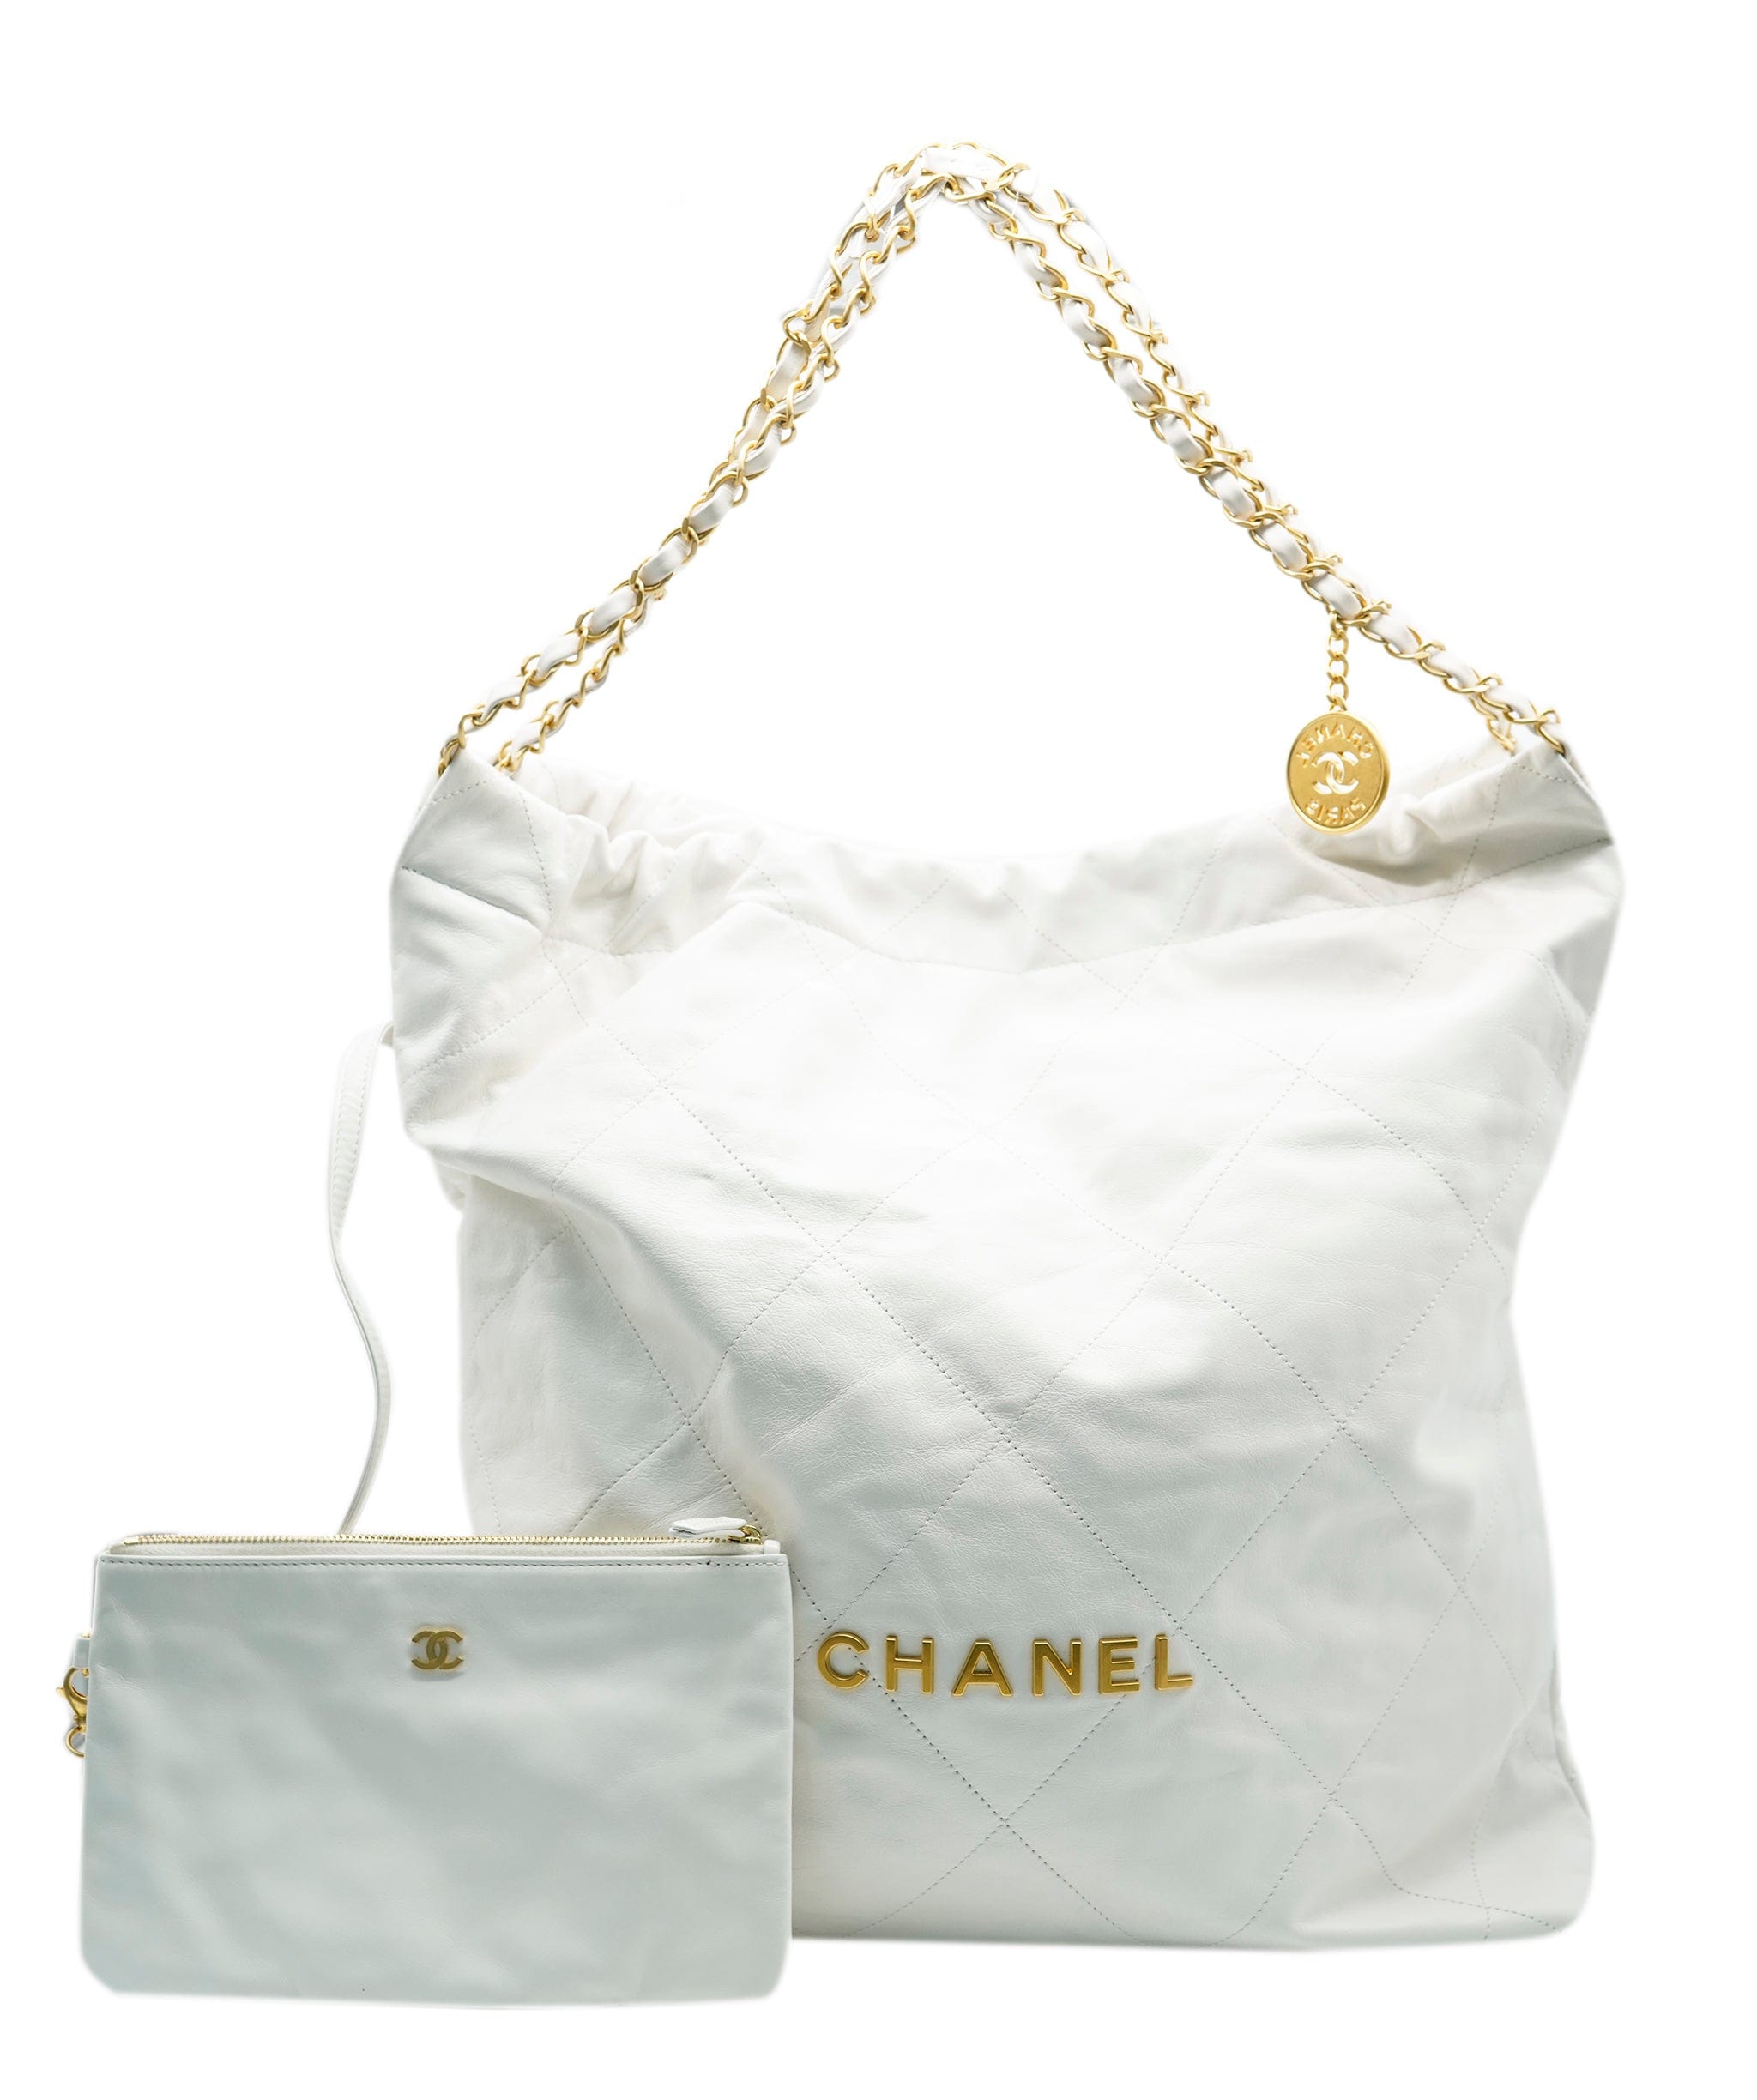 Chanel 22 leather handbag Chanel White in Leather - 34584302